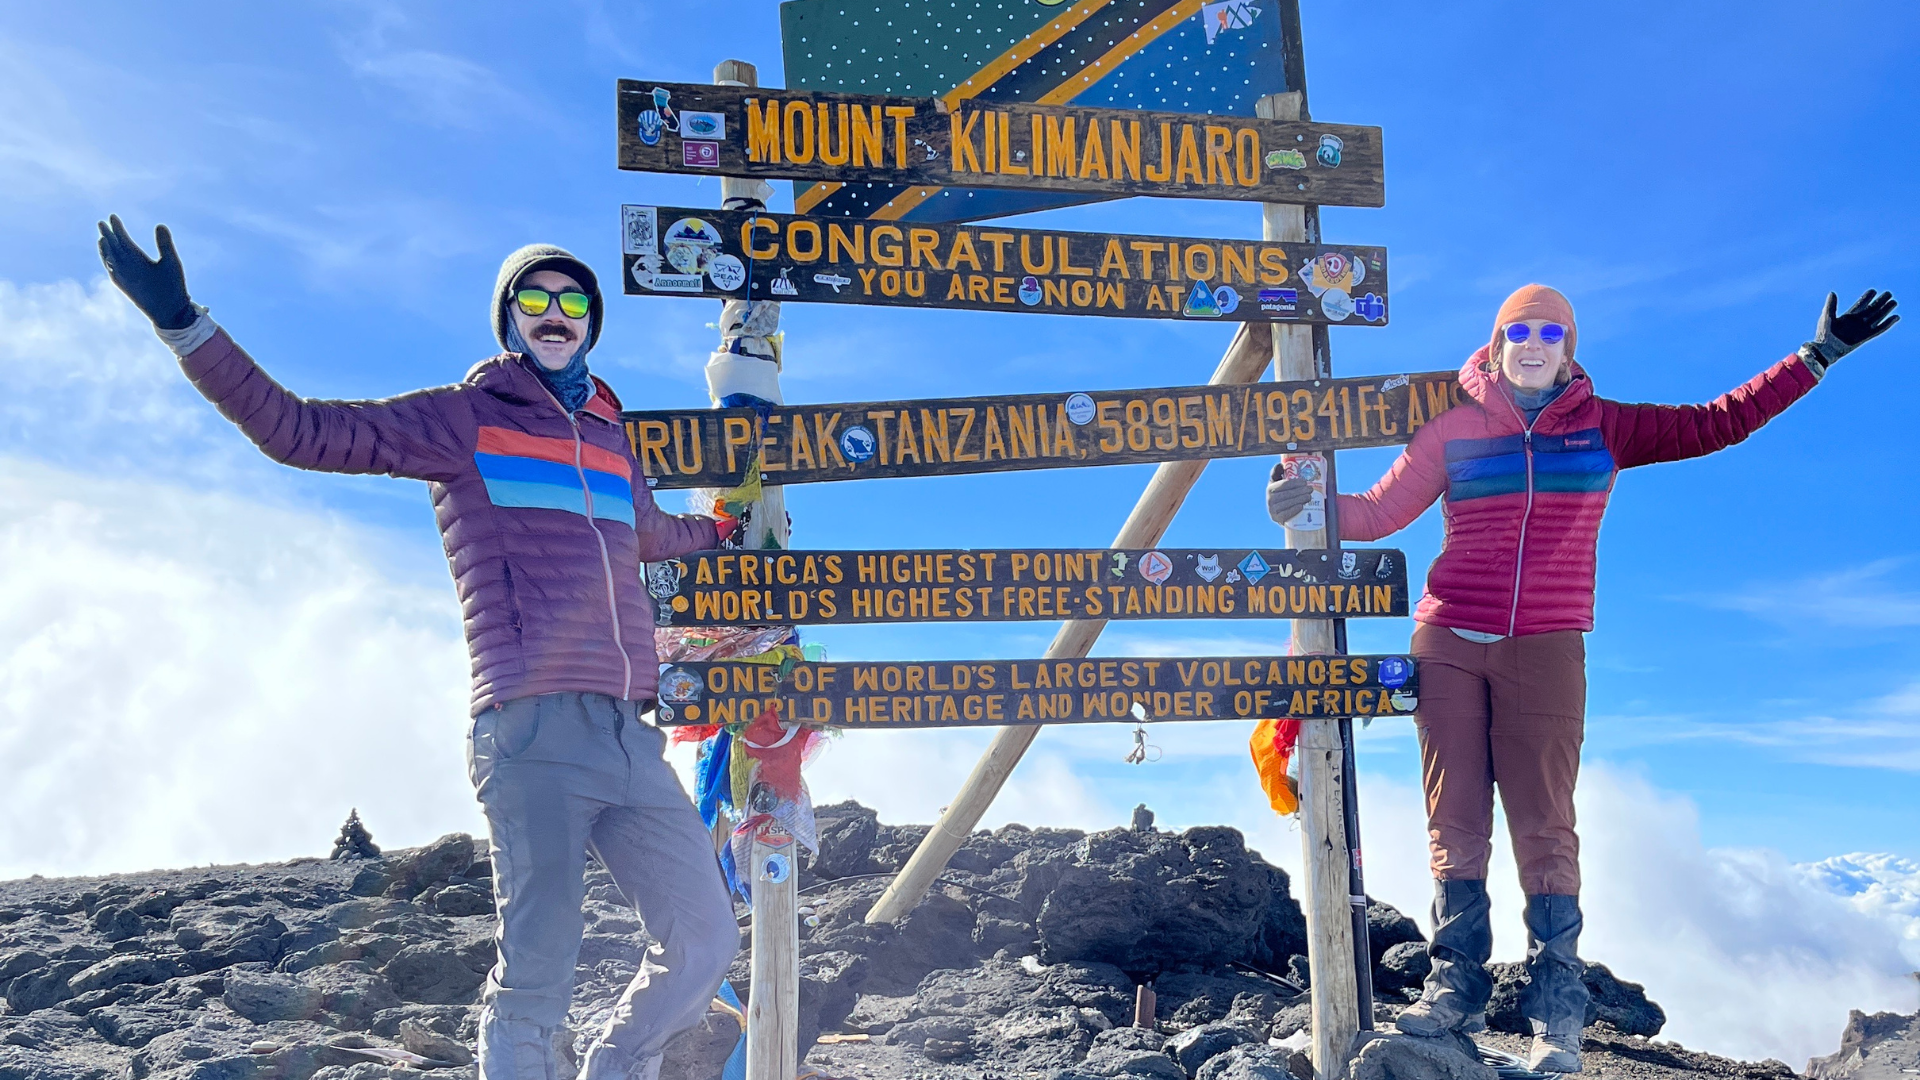 Two hikers, wearing sunglasses and warm clothing, stand on either side of the wooden sign that marks the summit of Mount Kilimanjaro. Both have their arms outstretched, celebrating their achievement. The sign lists various facts about the mountain.